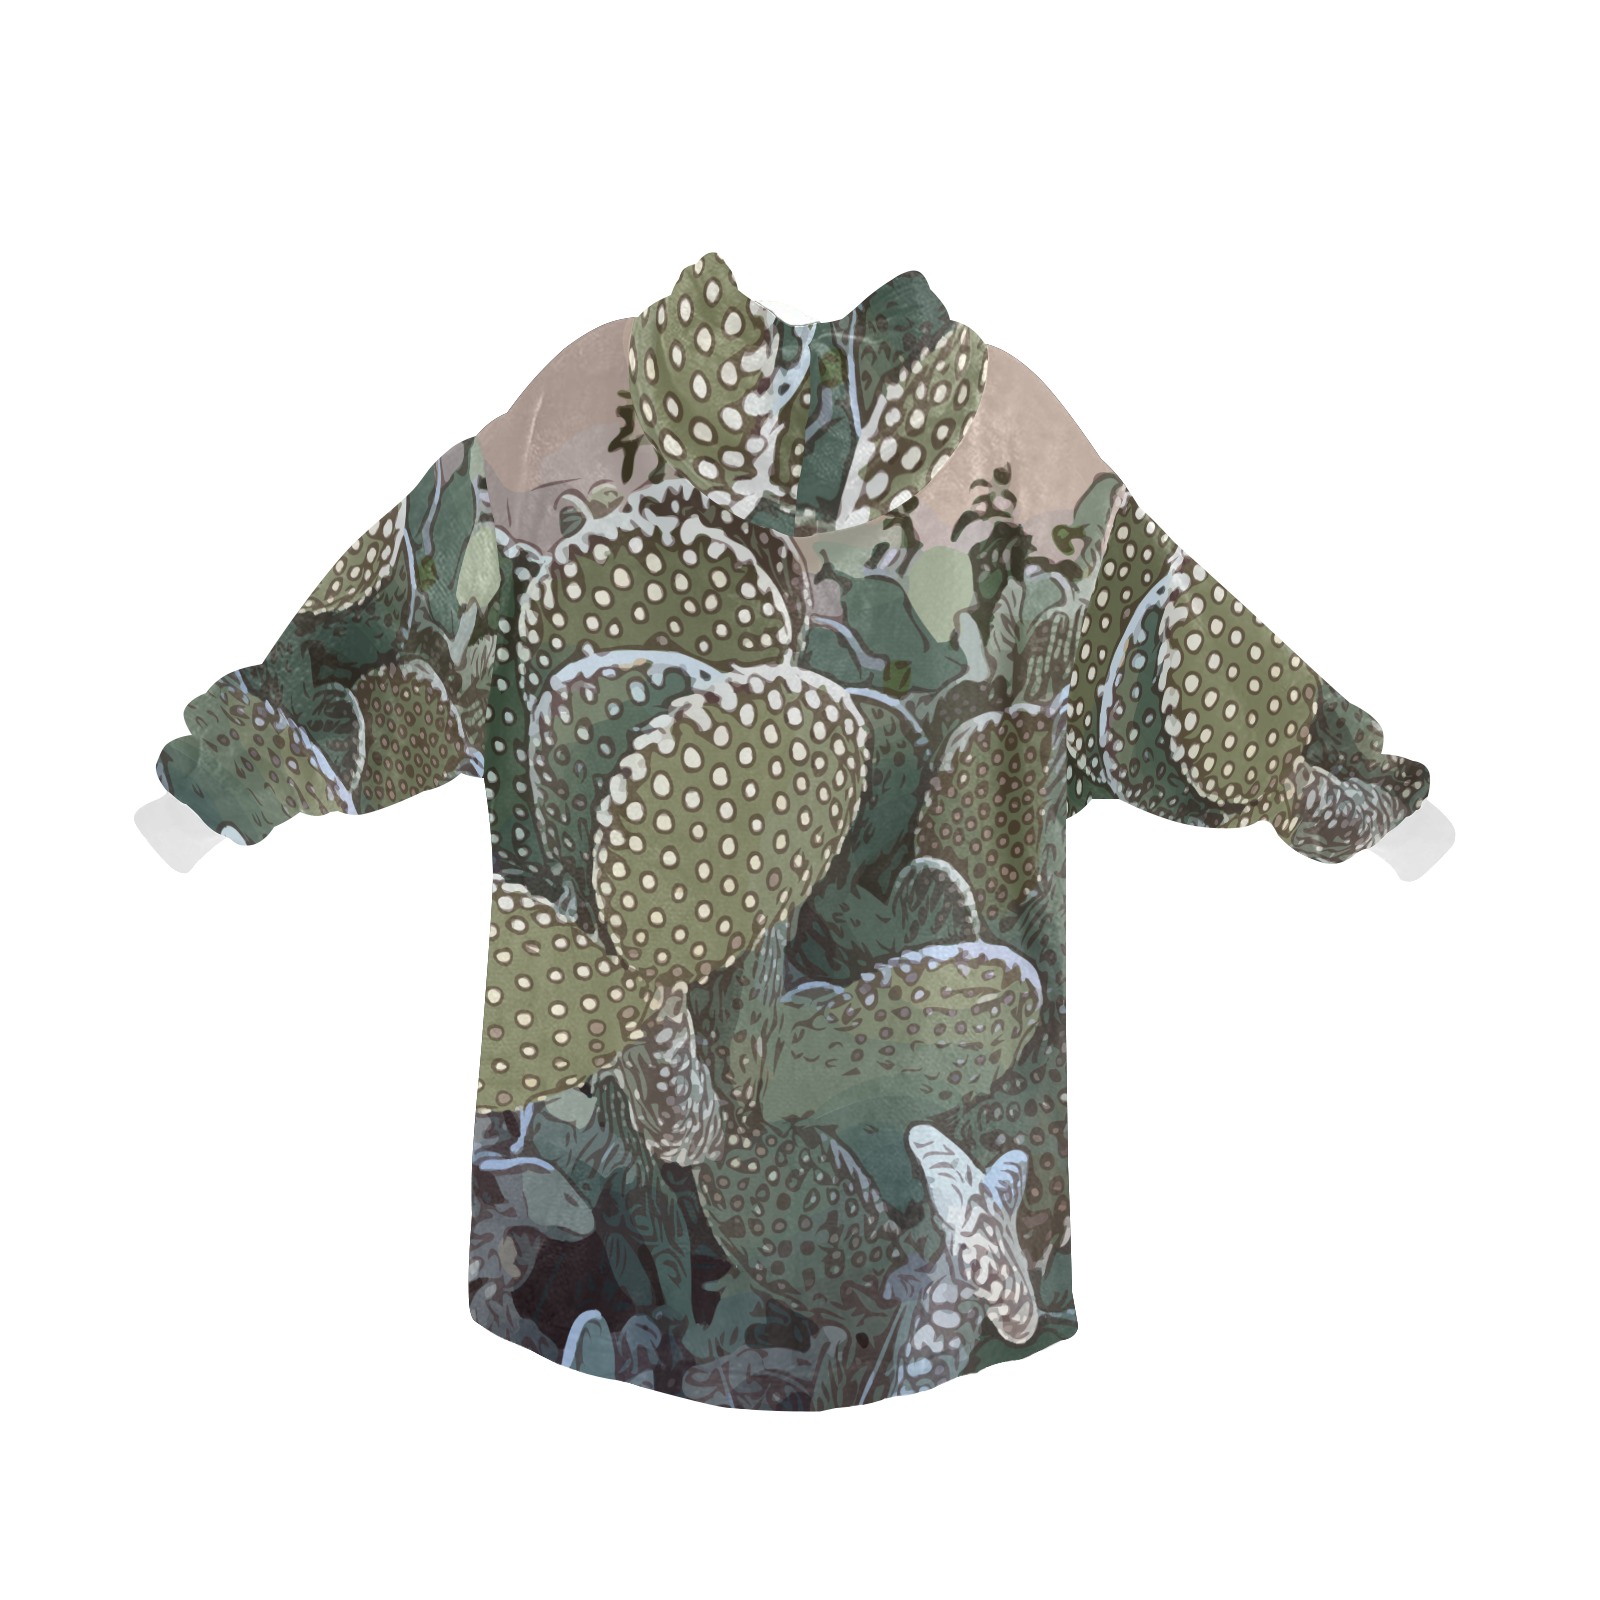 Cactusbedsmall Blanket Hoodie for Men